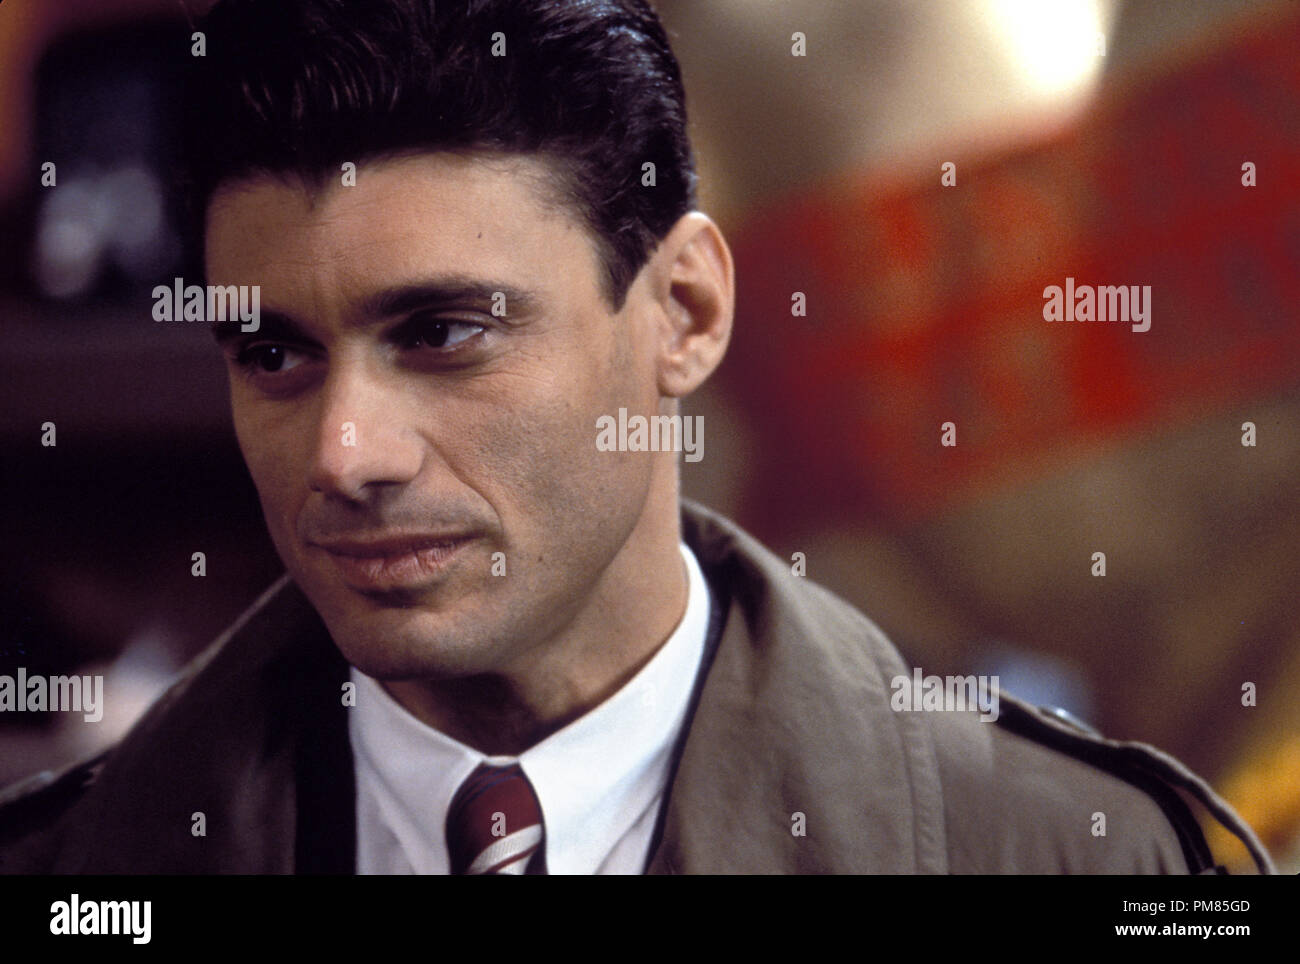 Film still or Publicity still from 'Raising Cain' Steven Bauer © 1992 Universal Pictures Photo Credit: Phil Bray  All Rights Reserved   File Reference # 31487 204THA  For Editorial Use Only Stock Photo